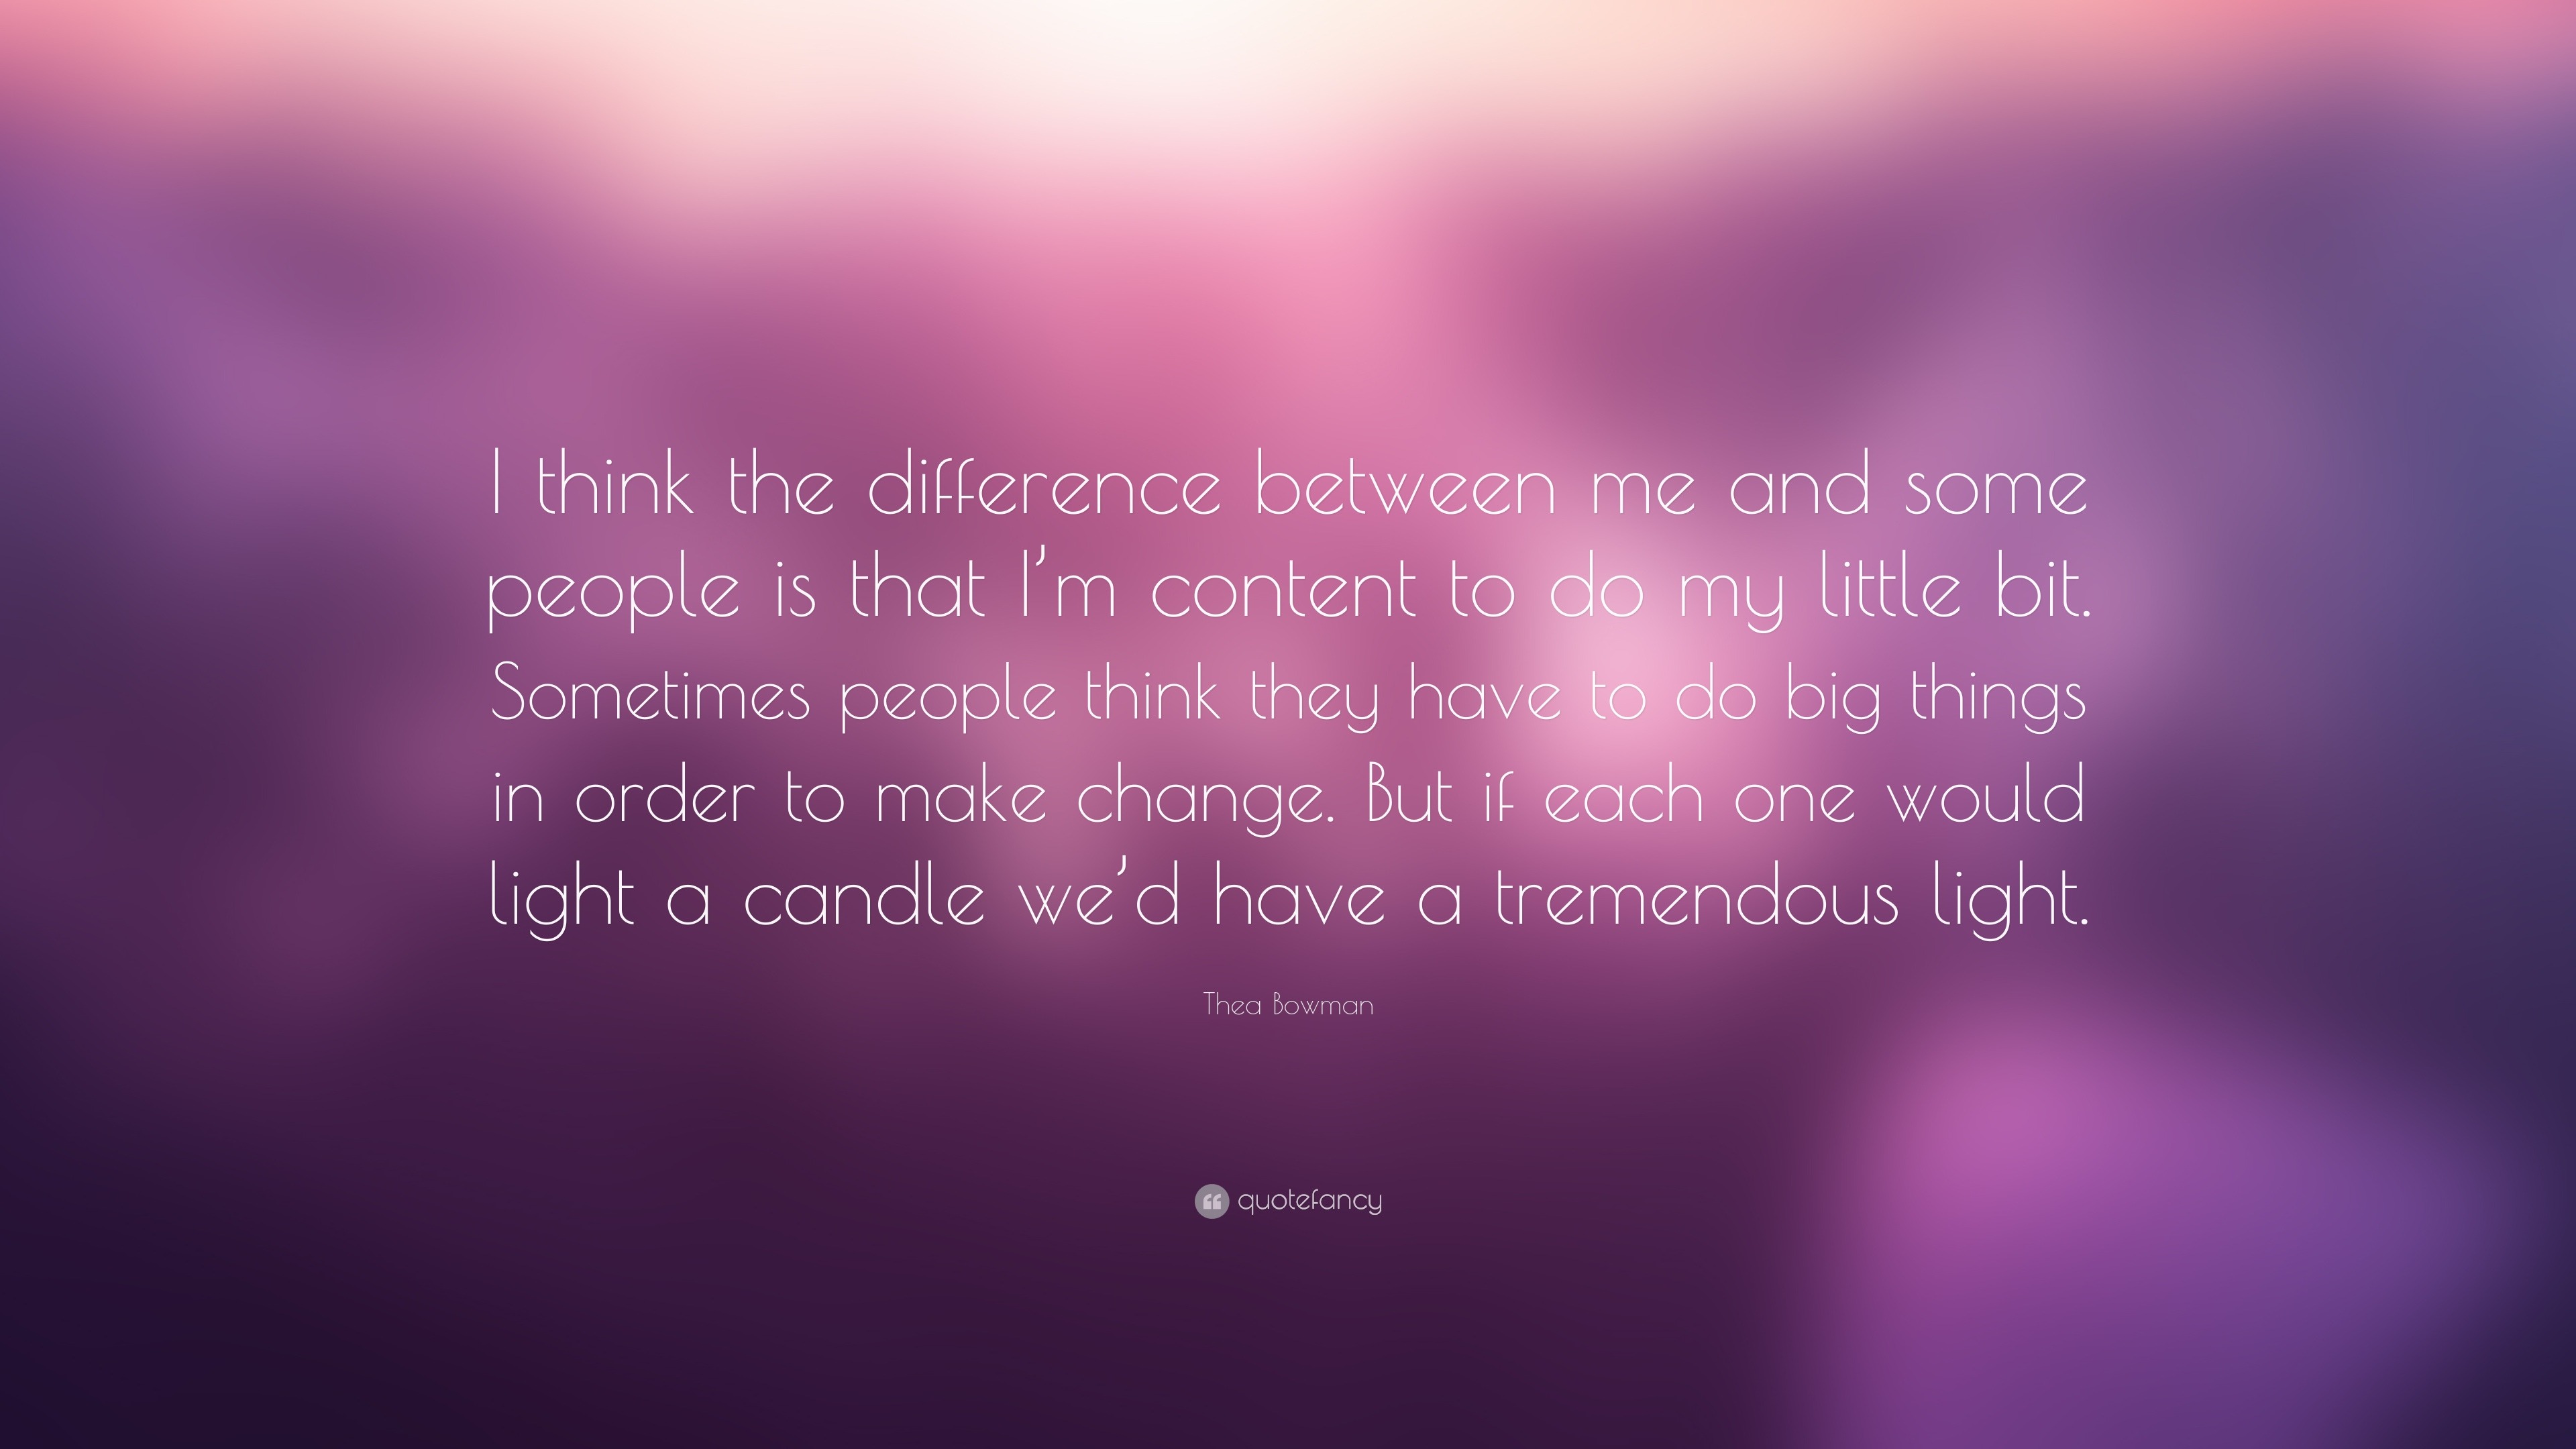 https://quotefancy.com/media/wallpaper/3840x2160/1564045-Thea-Bowman-Quote-I-think-the-difference-between-me-and-some.jpg